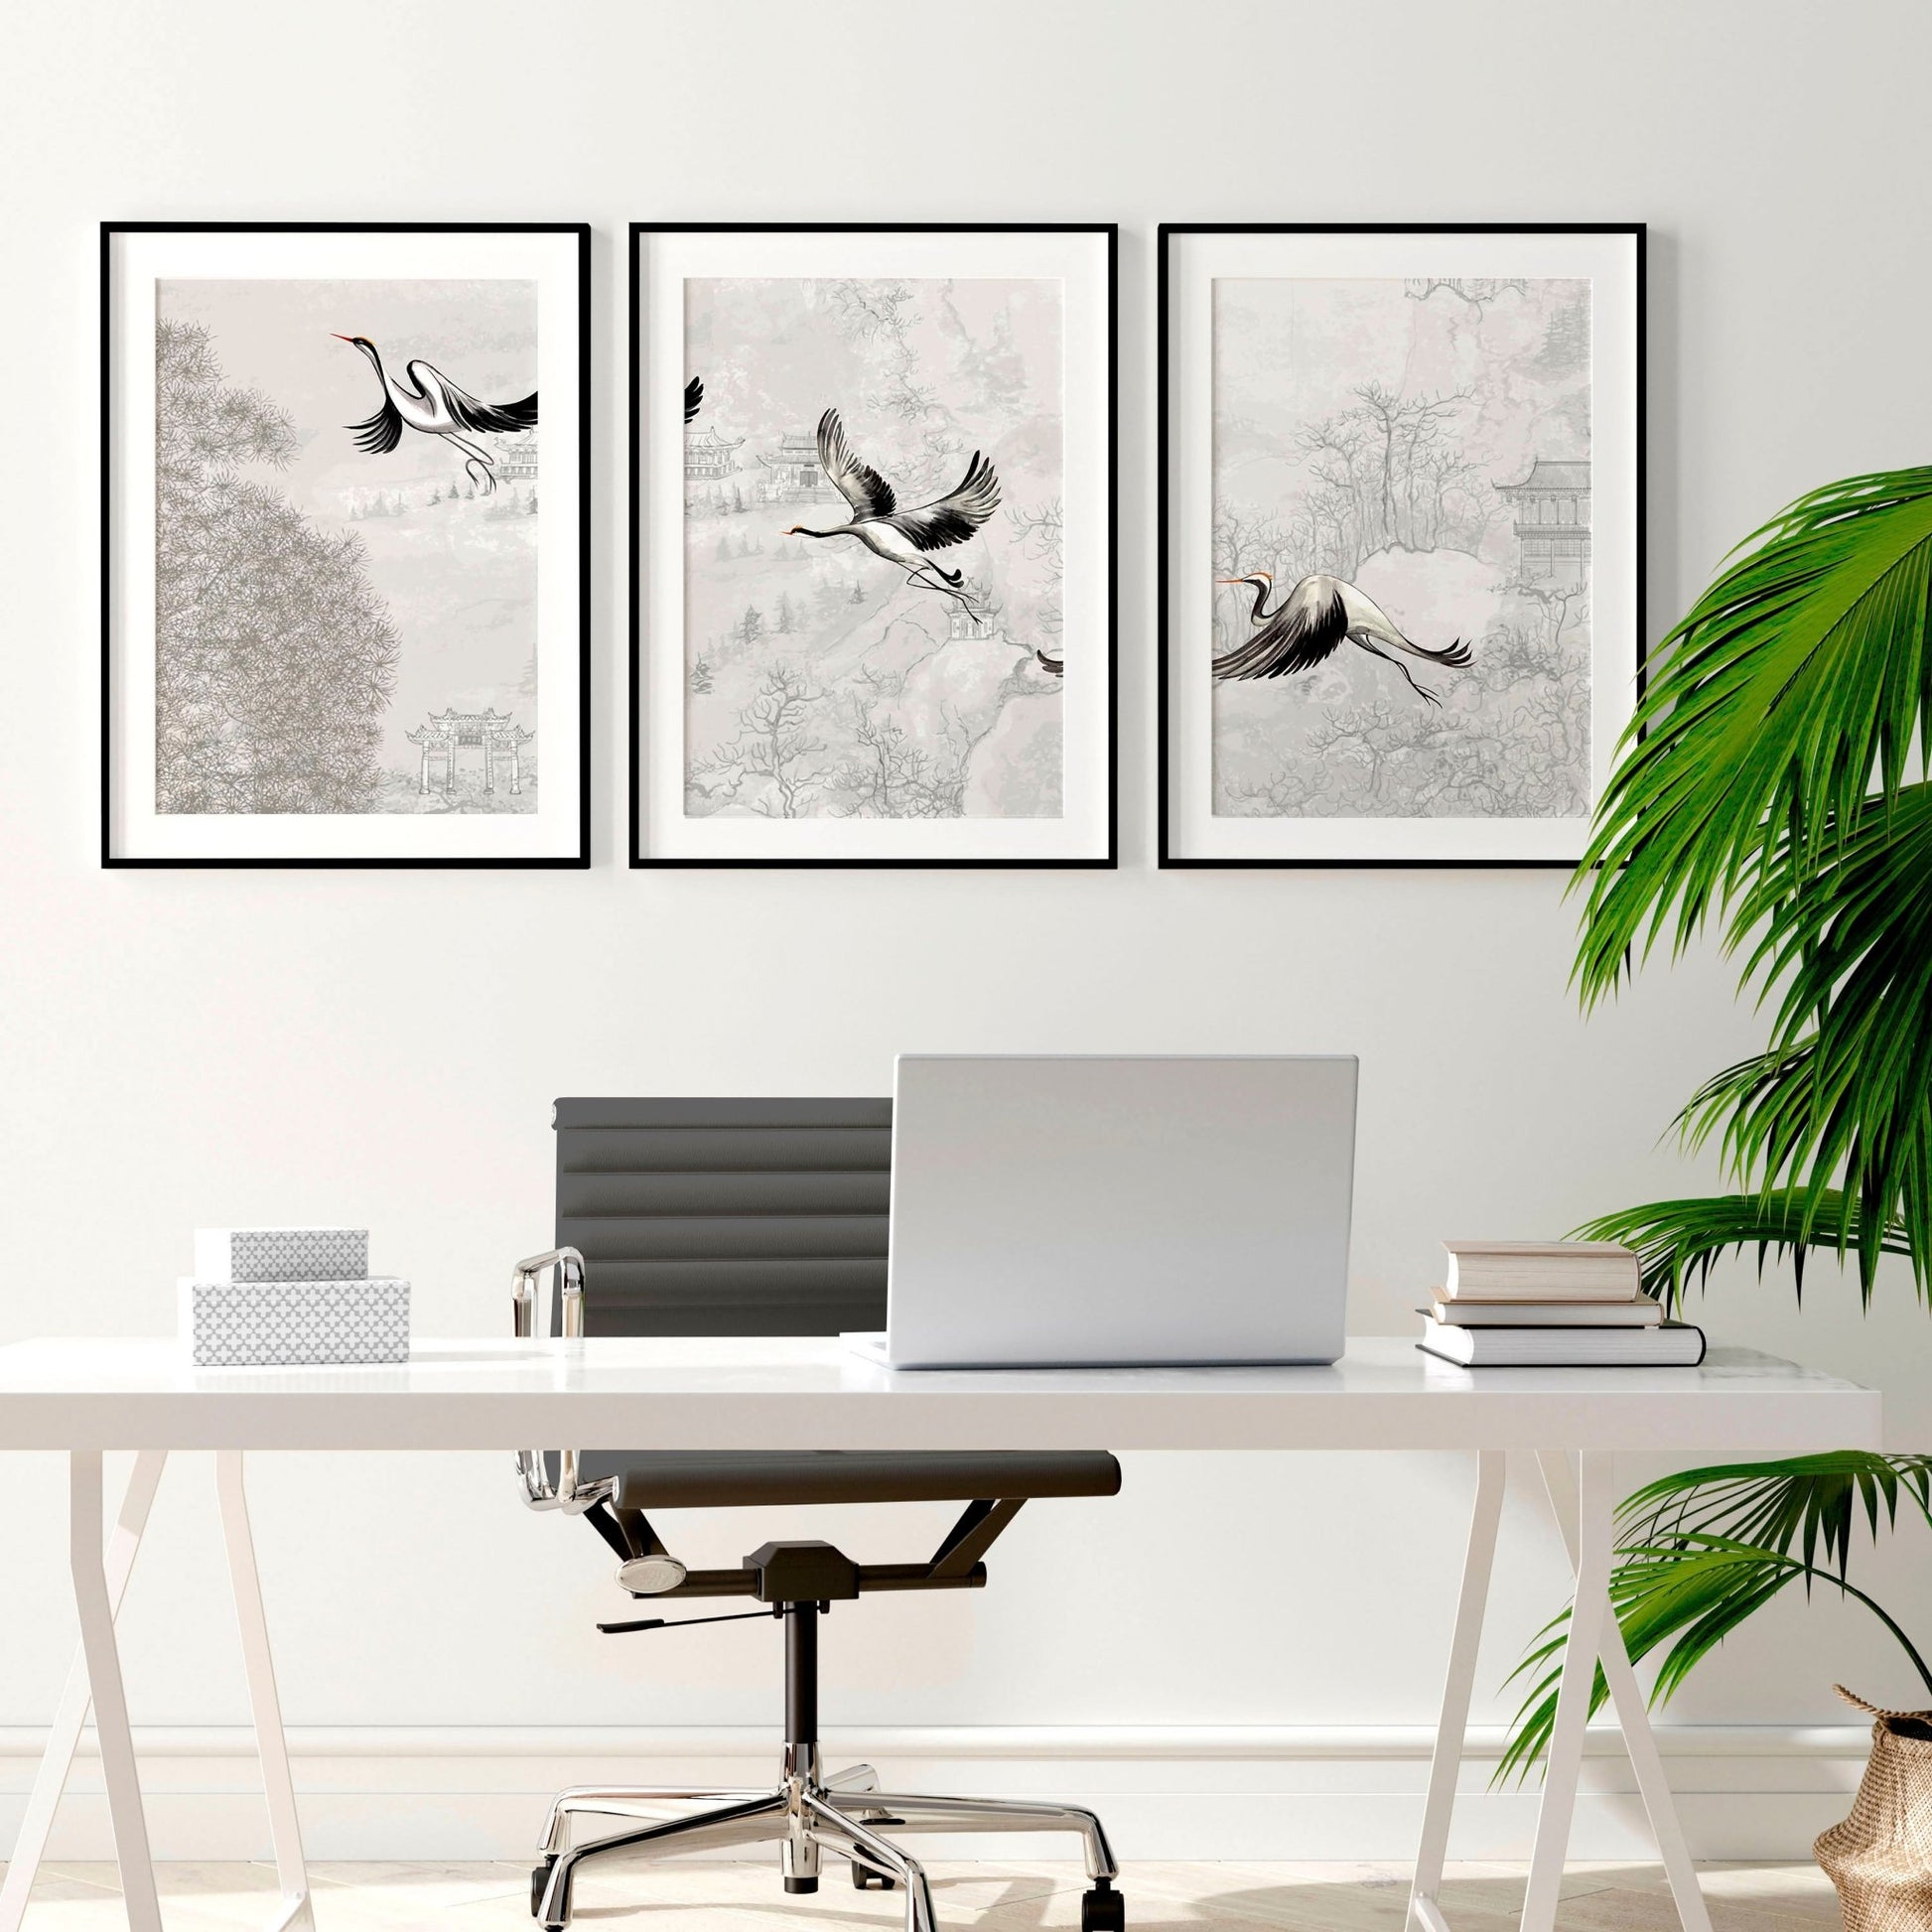 Pictures for office walls | set of 3 wall art prints - About Wall Art